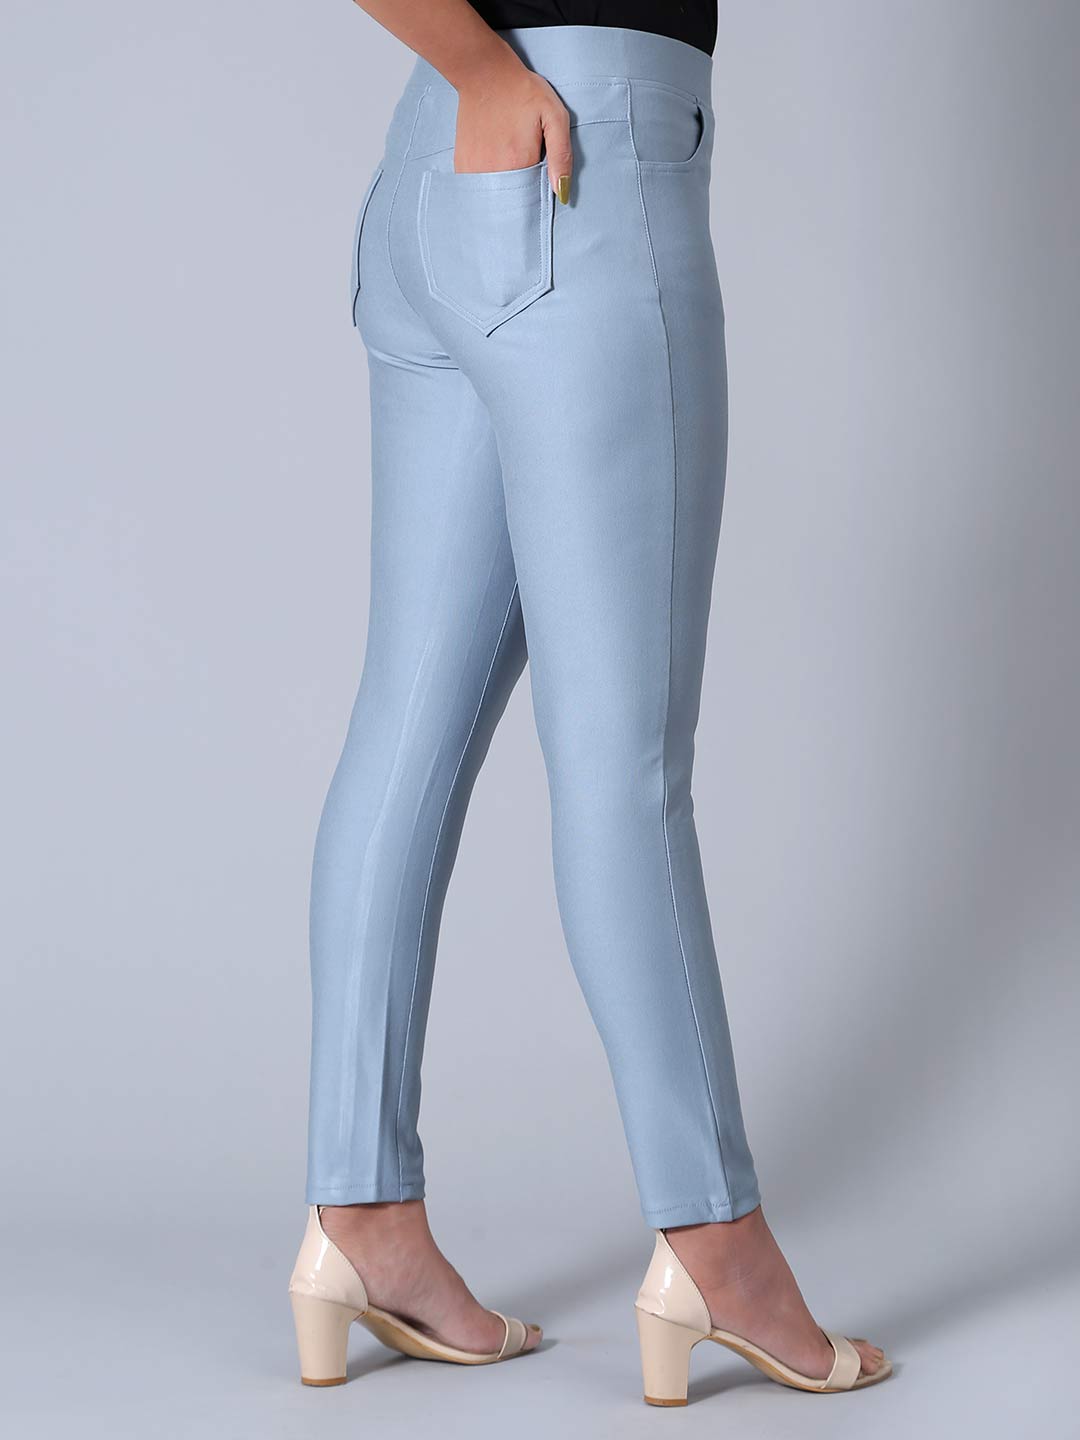 Buy PREEGO Women Royal Blue & White Solid jeggings Online at Best